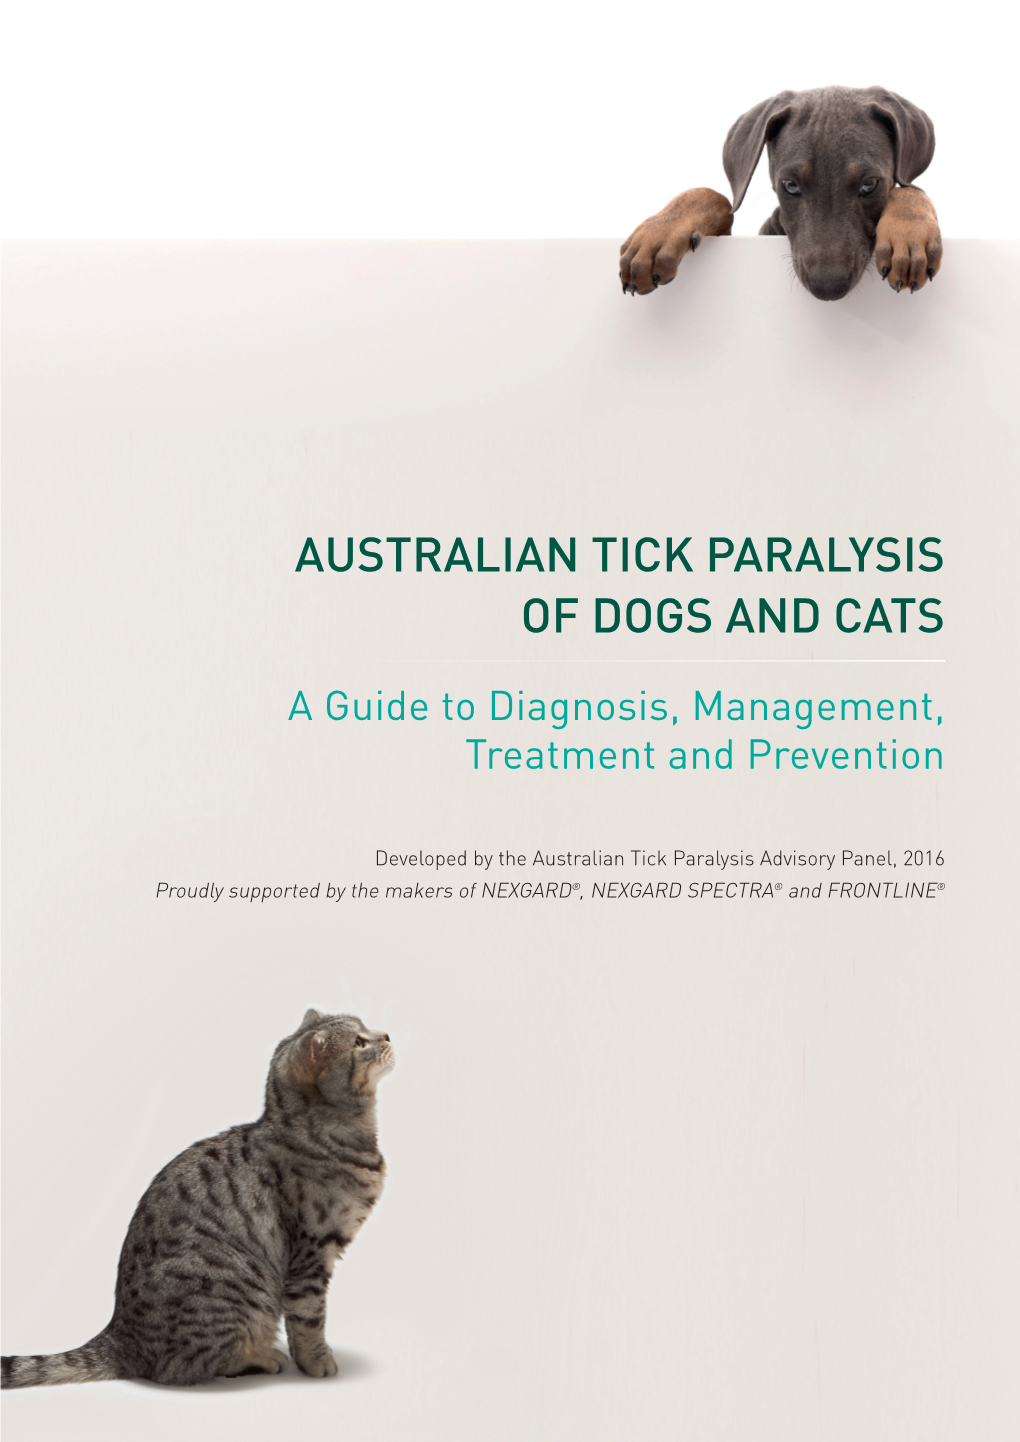 Australian Tick Paralysis of Dogs and Cats